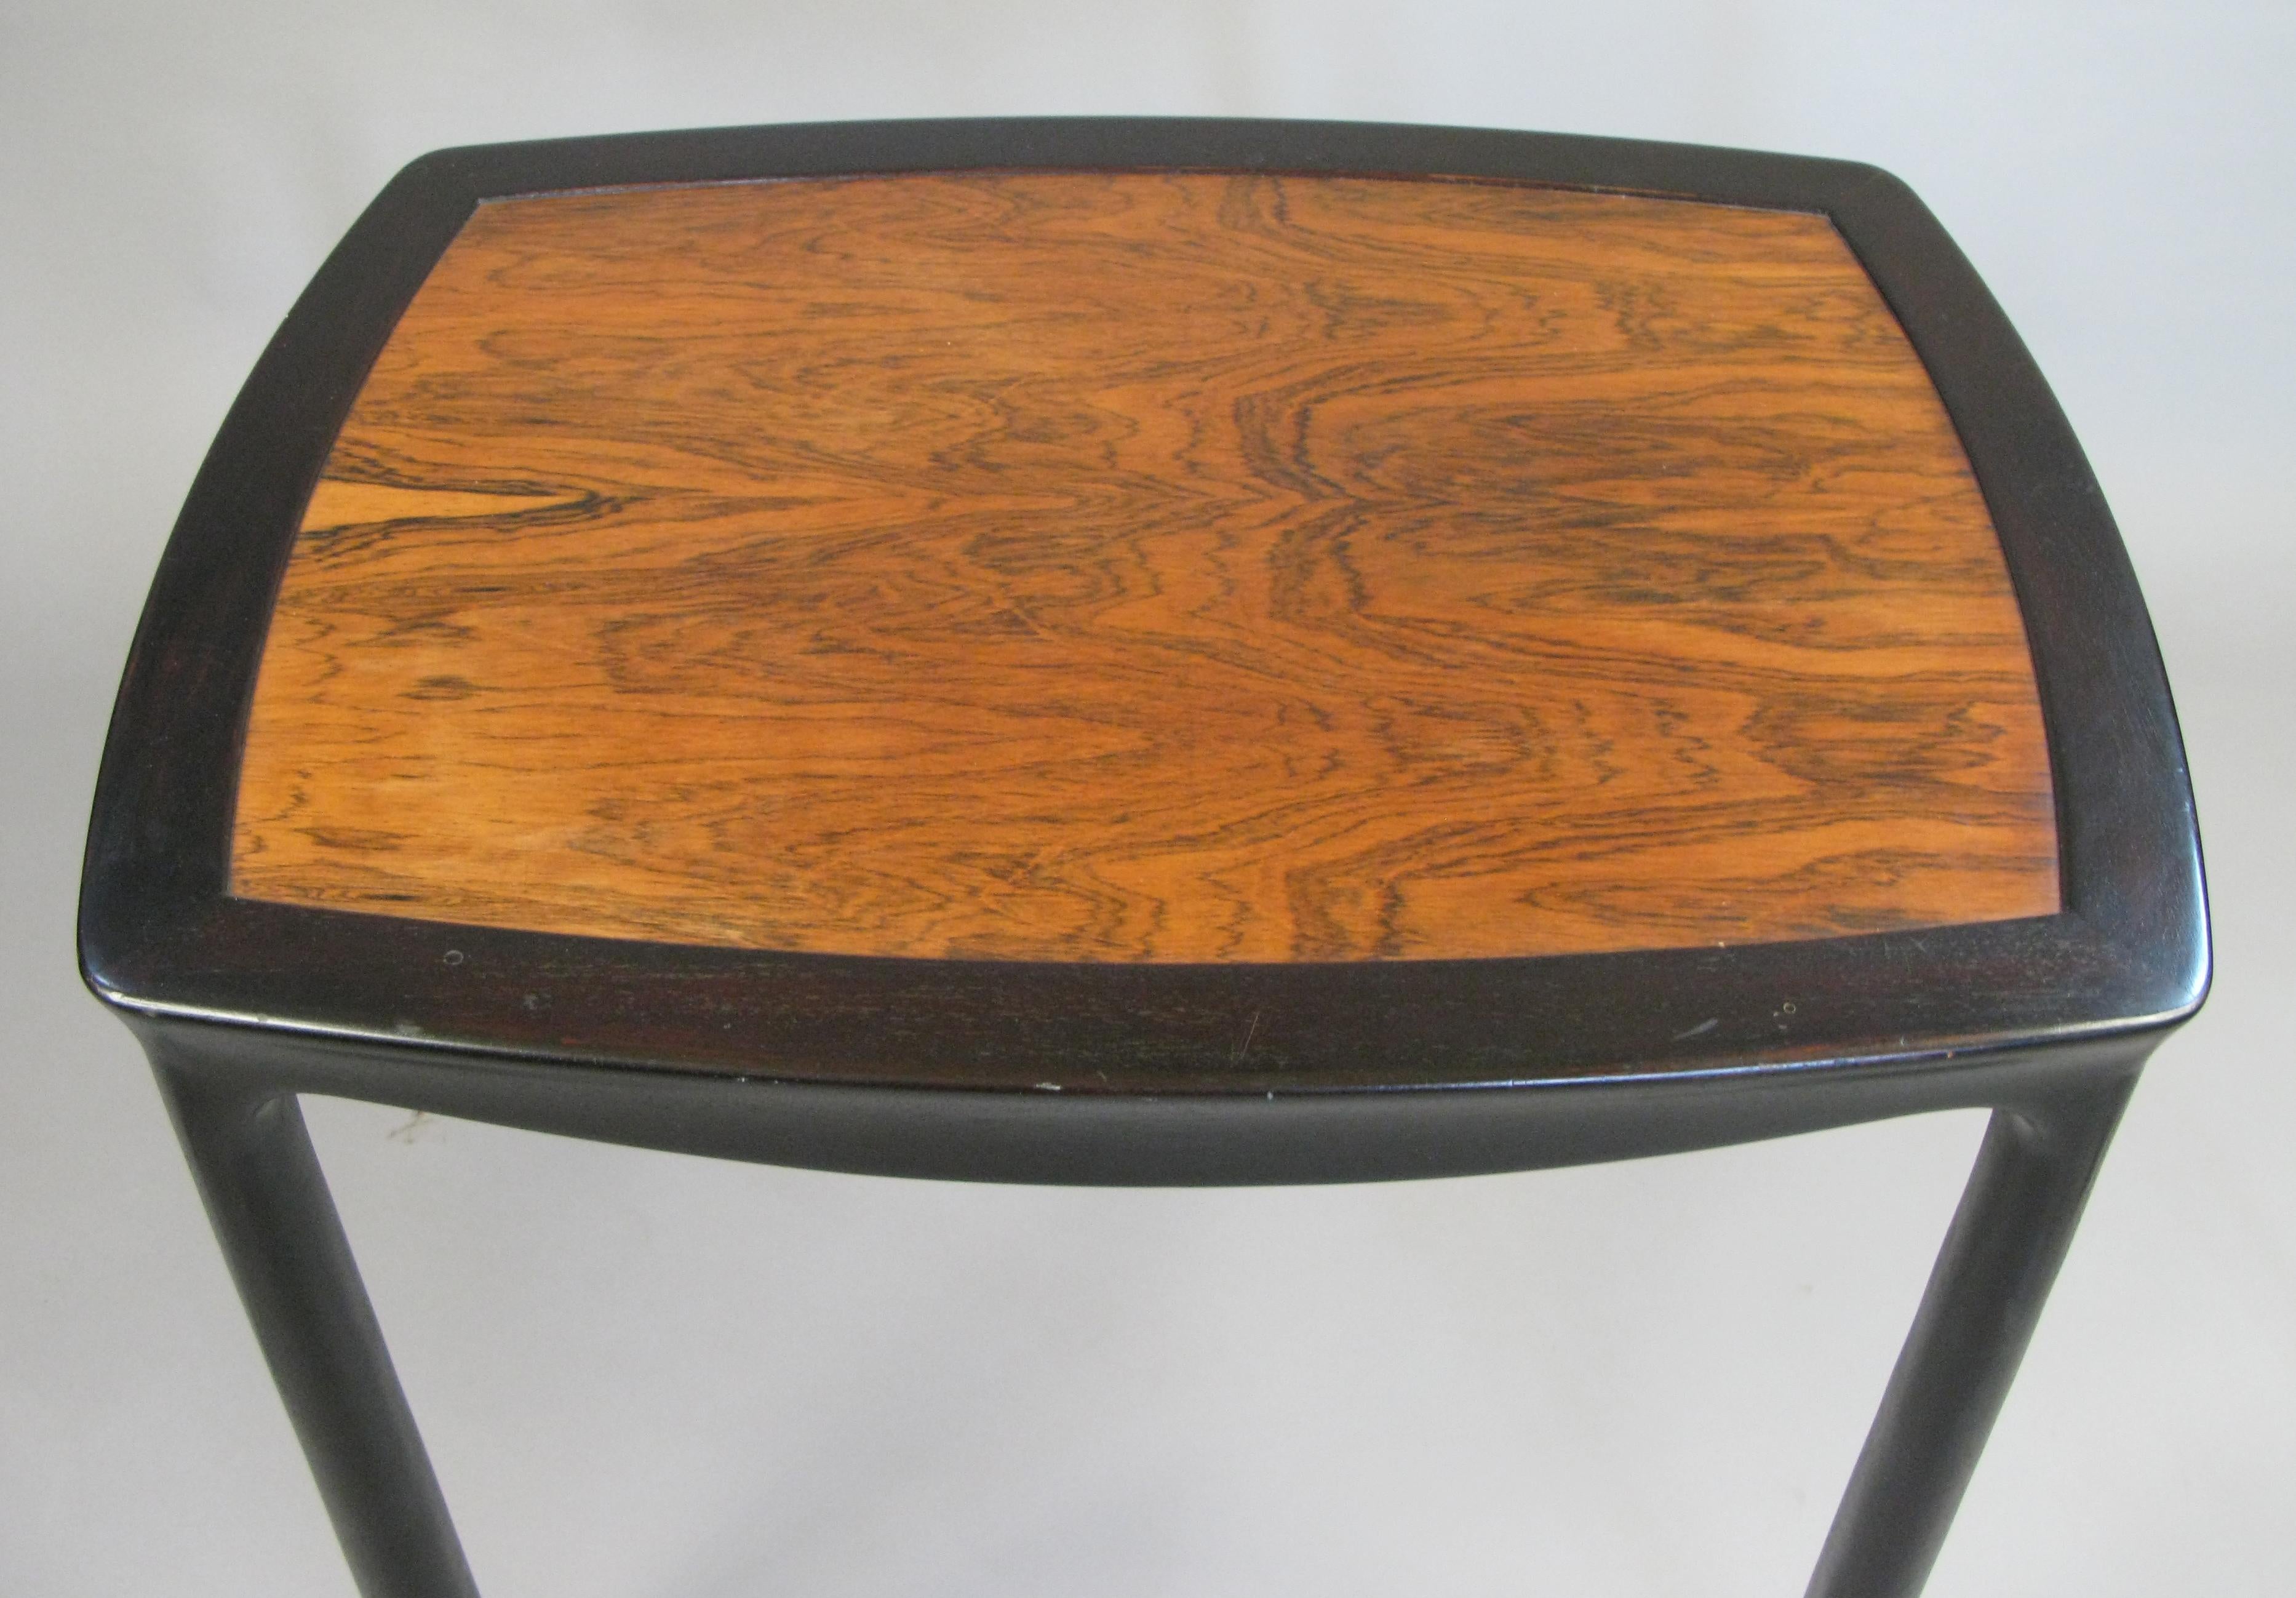 A very nice vintage 1960s occasional table by Edward Wormley for Dunbar. Beautiful details with subtly curved top and skirt, and legs which are slightly wider at the base. Frame is ebonized mahogany and the inset top is rosewood.